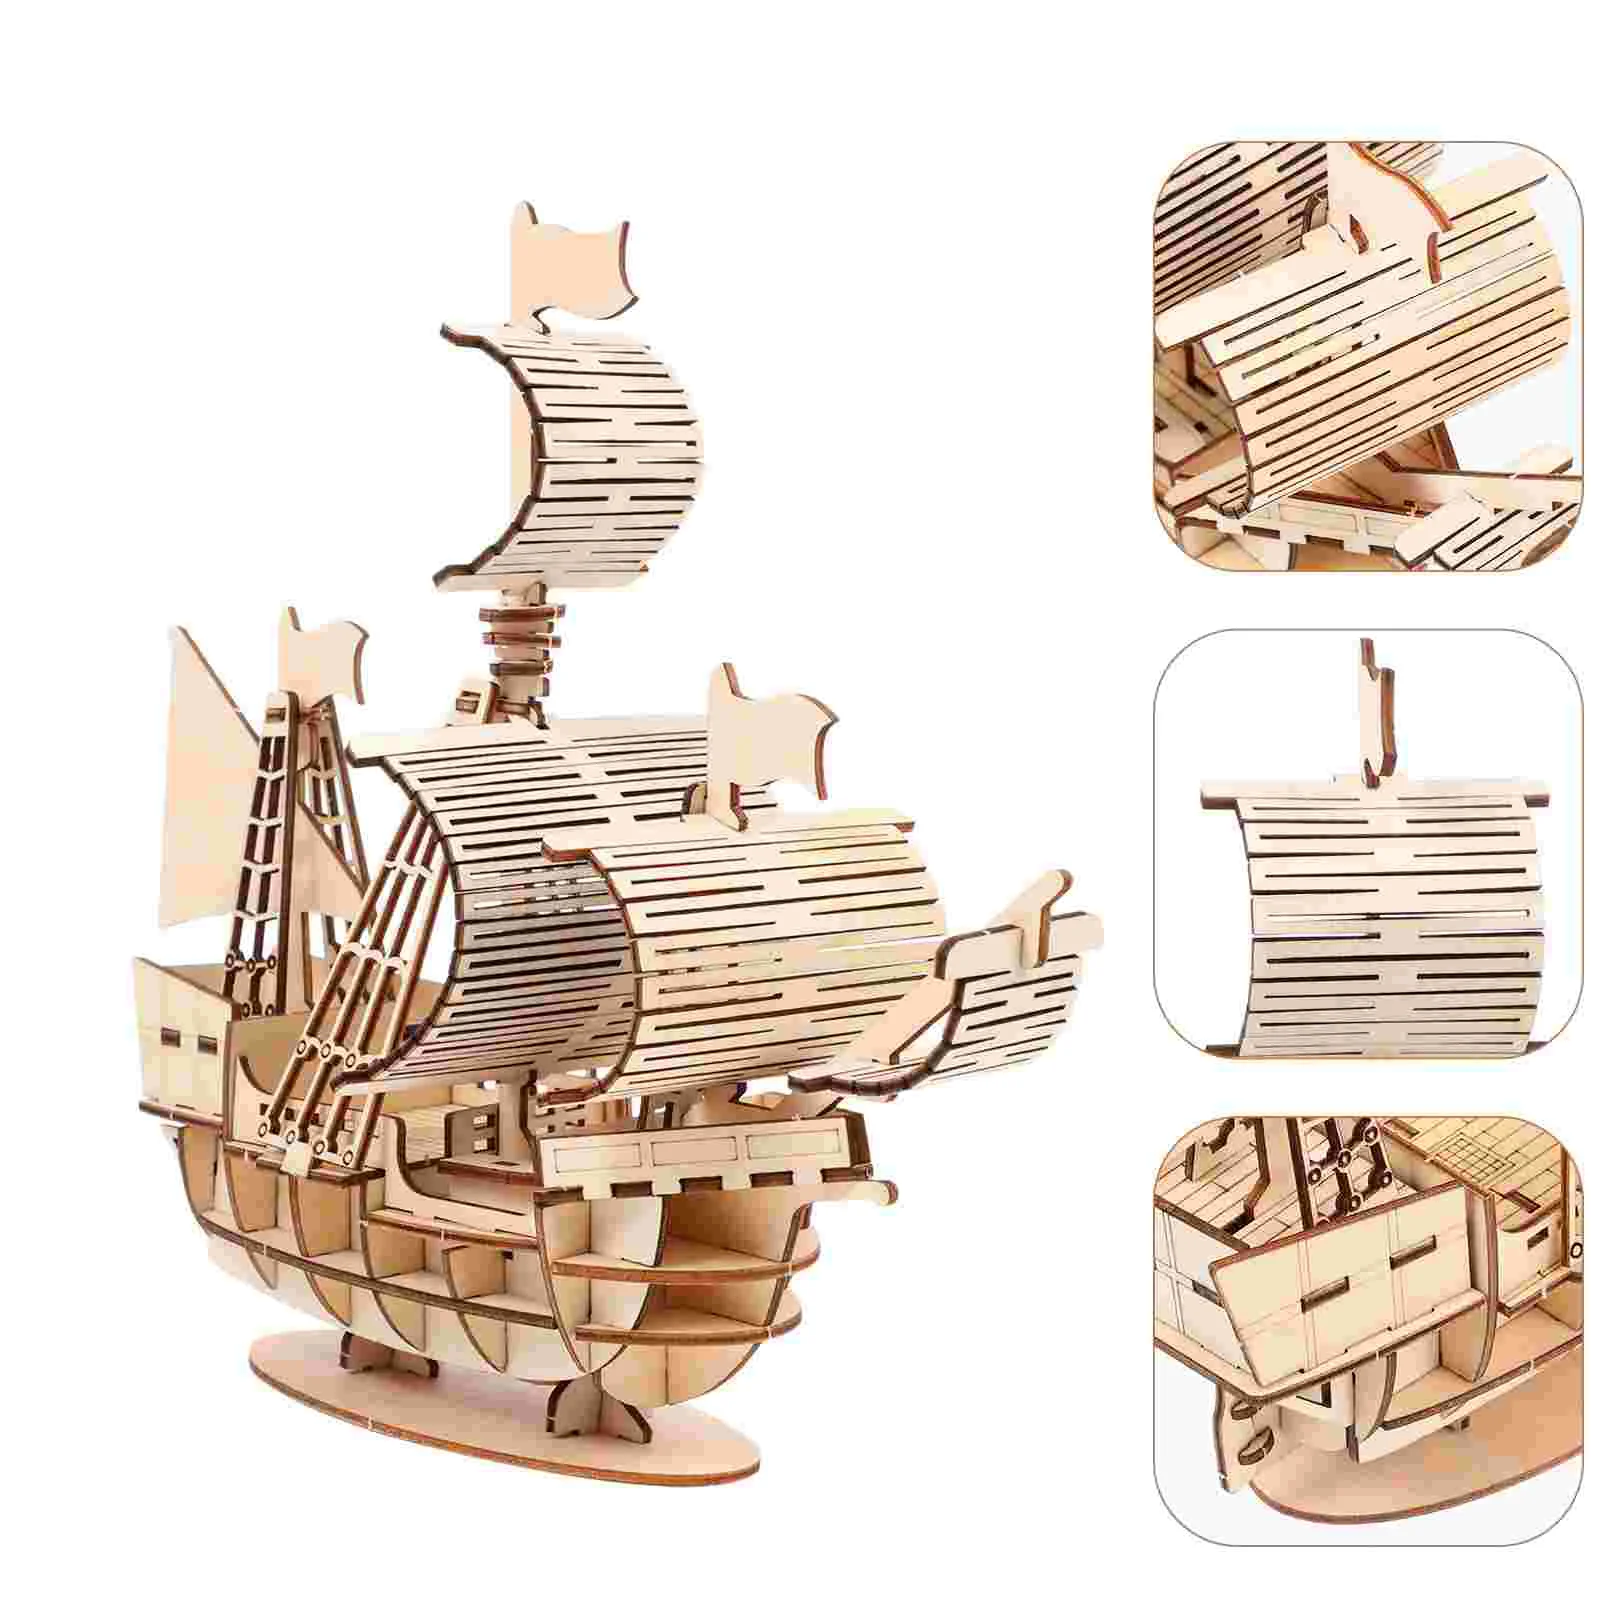 

Diorama 3D Sailing Ship Puzzle Toy Model Wooden Assembly Assembled DIY Puzzles Building Playset